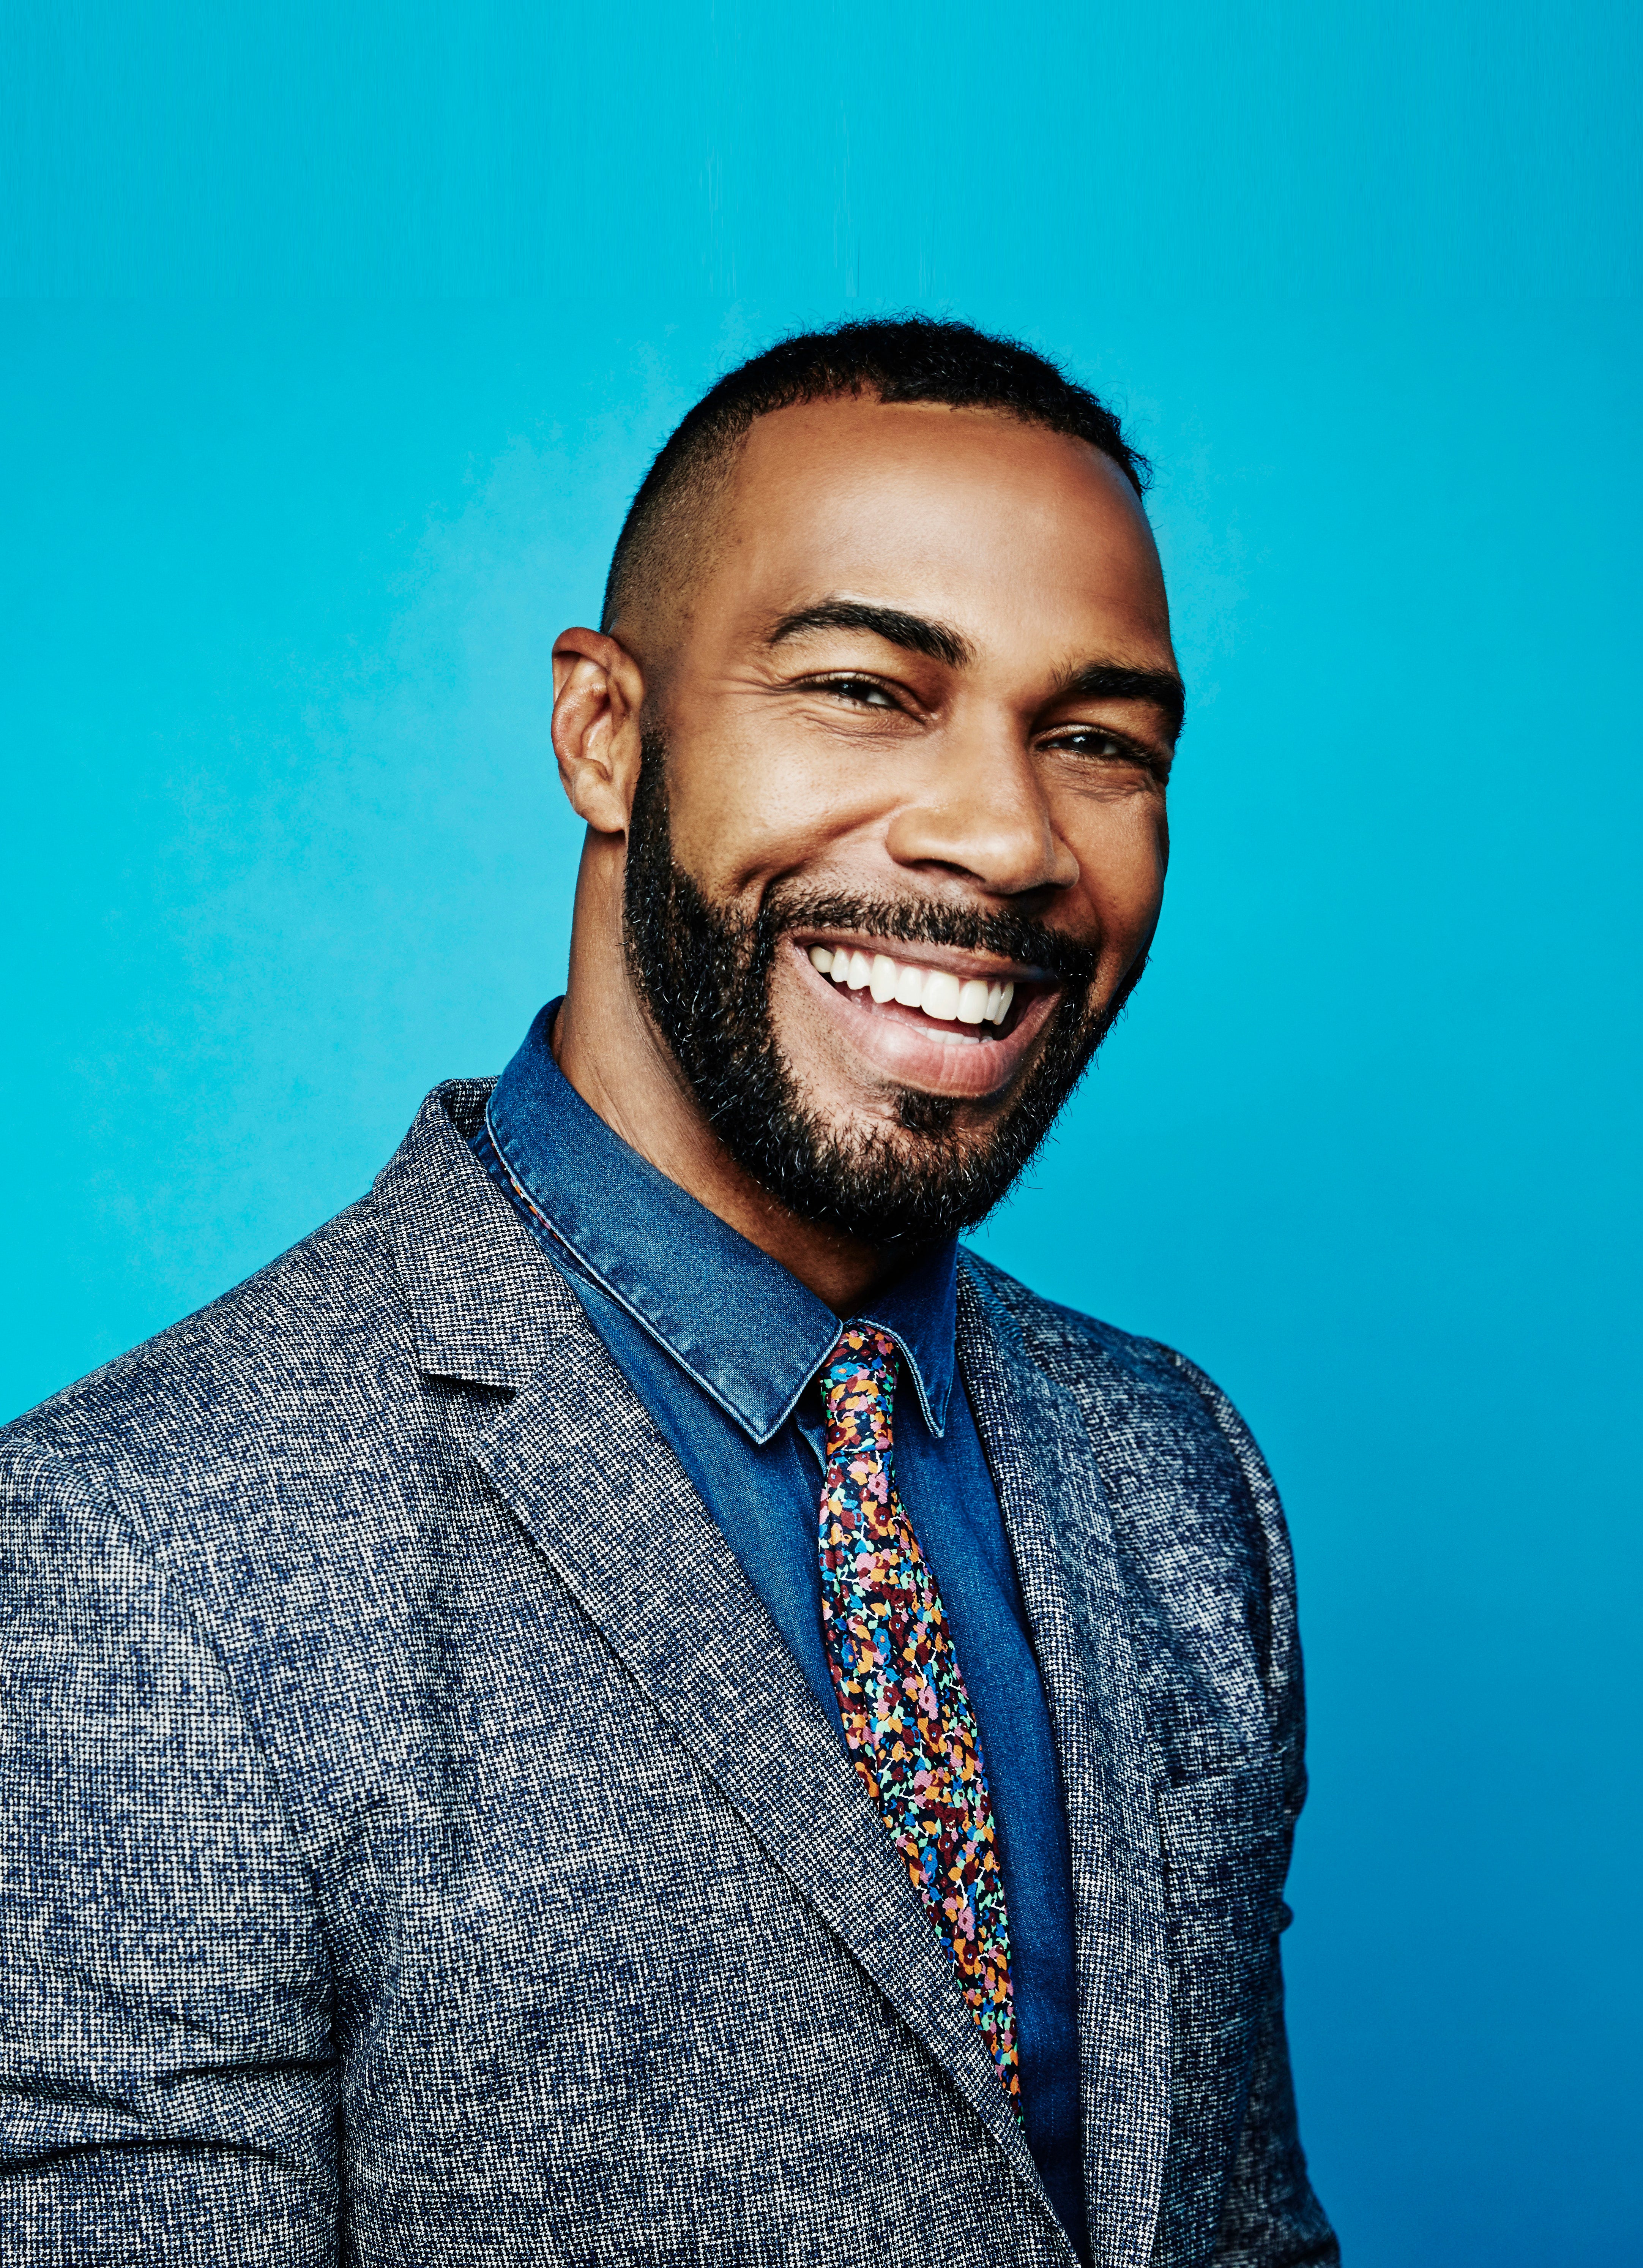 Why Omari Hardwick Says His Wife Is The Reason He Landed His Role On 'Power'
